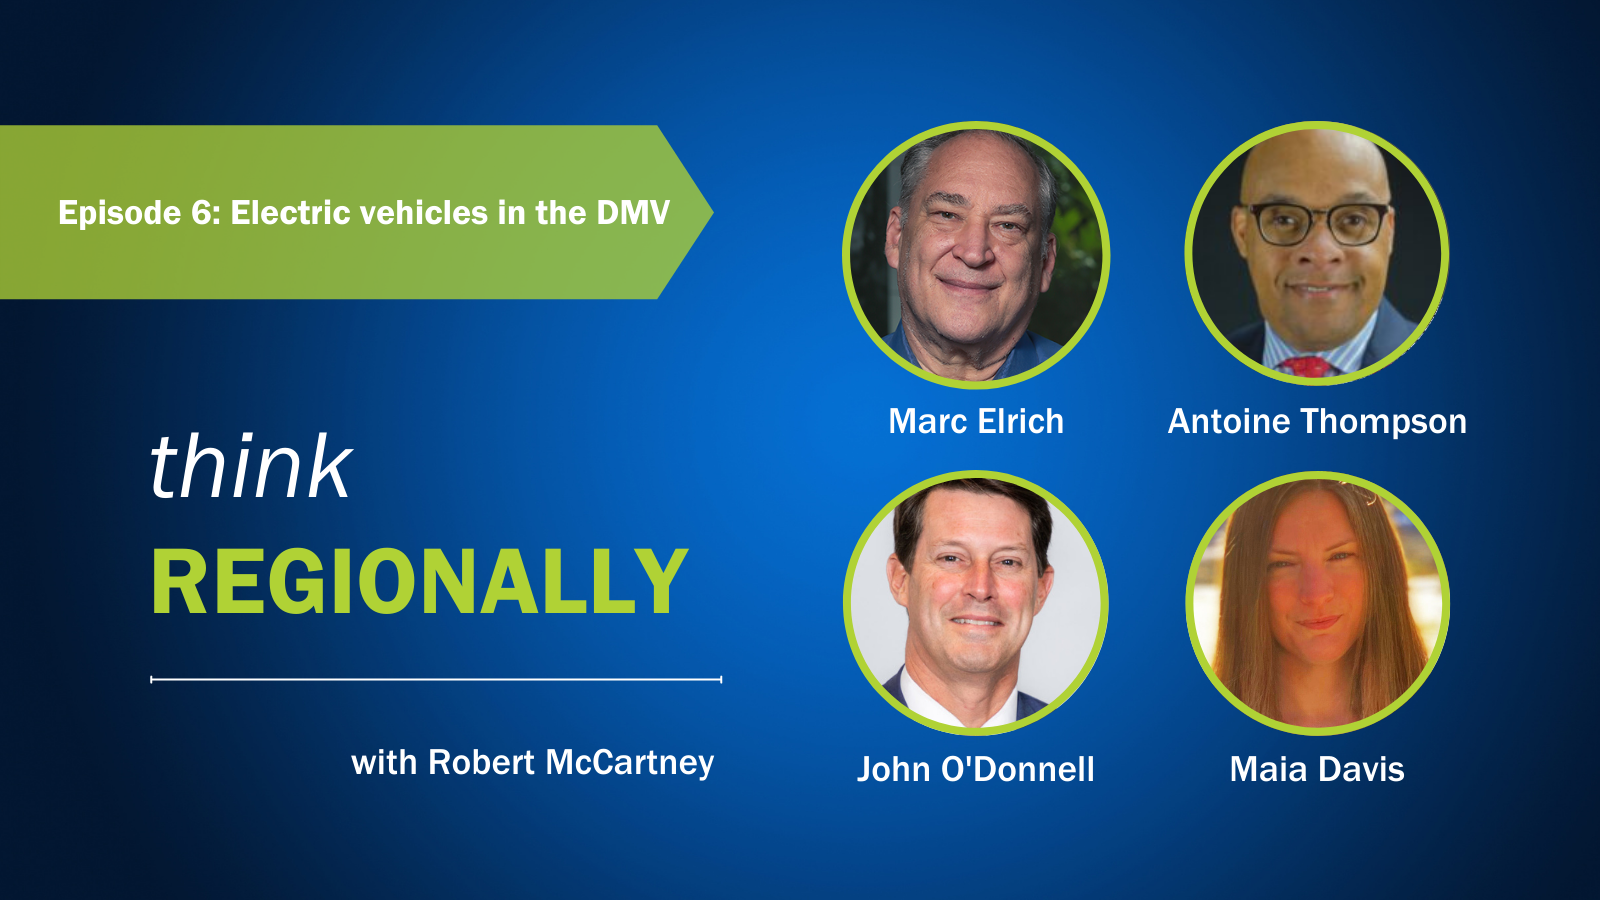 podcast-electric-vehicles-in-the-dmv-news-highlight-news